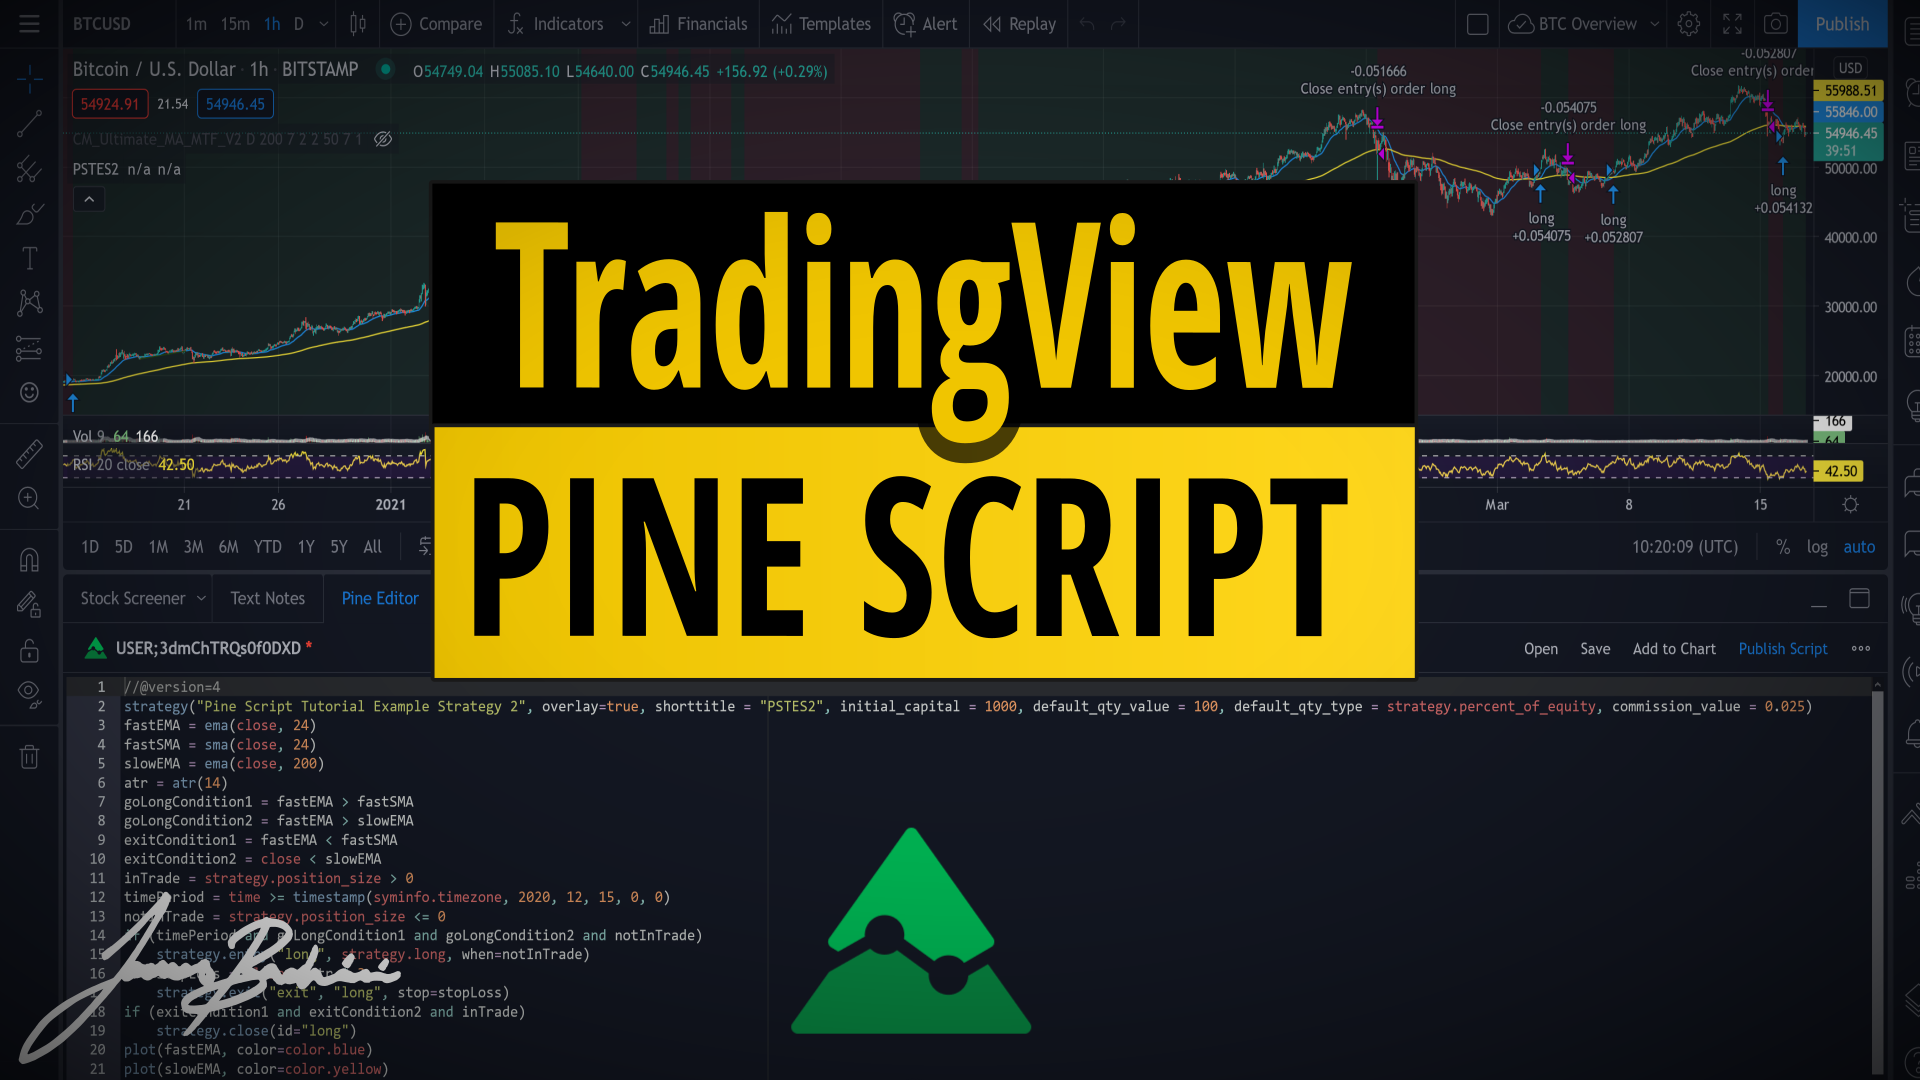 Pine Script Tutorial | How To Develop Real Trading Strategies On TradingView